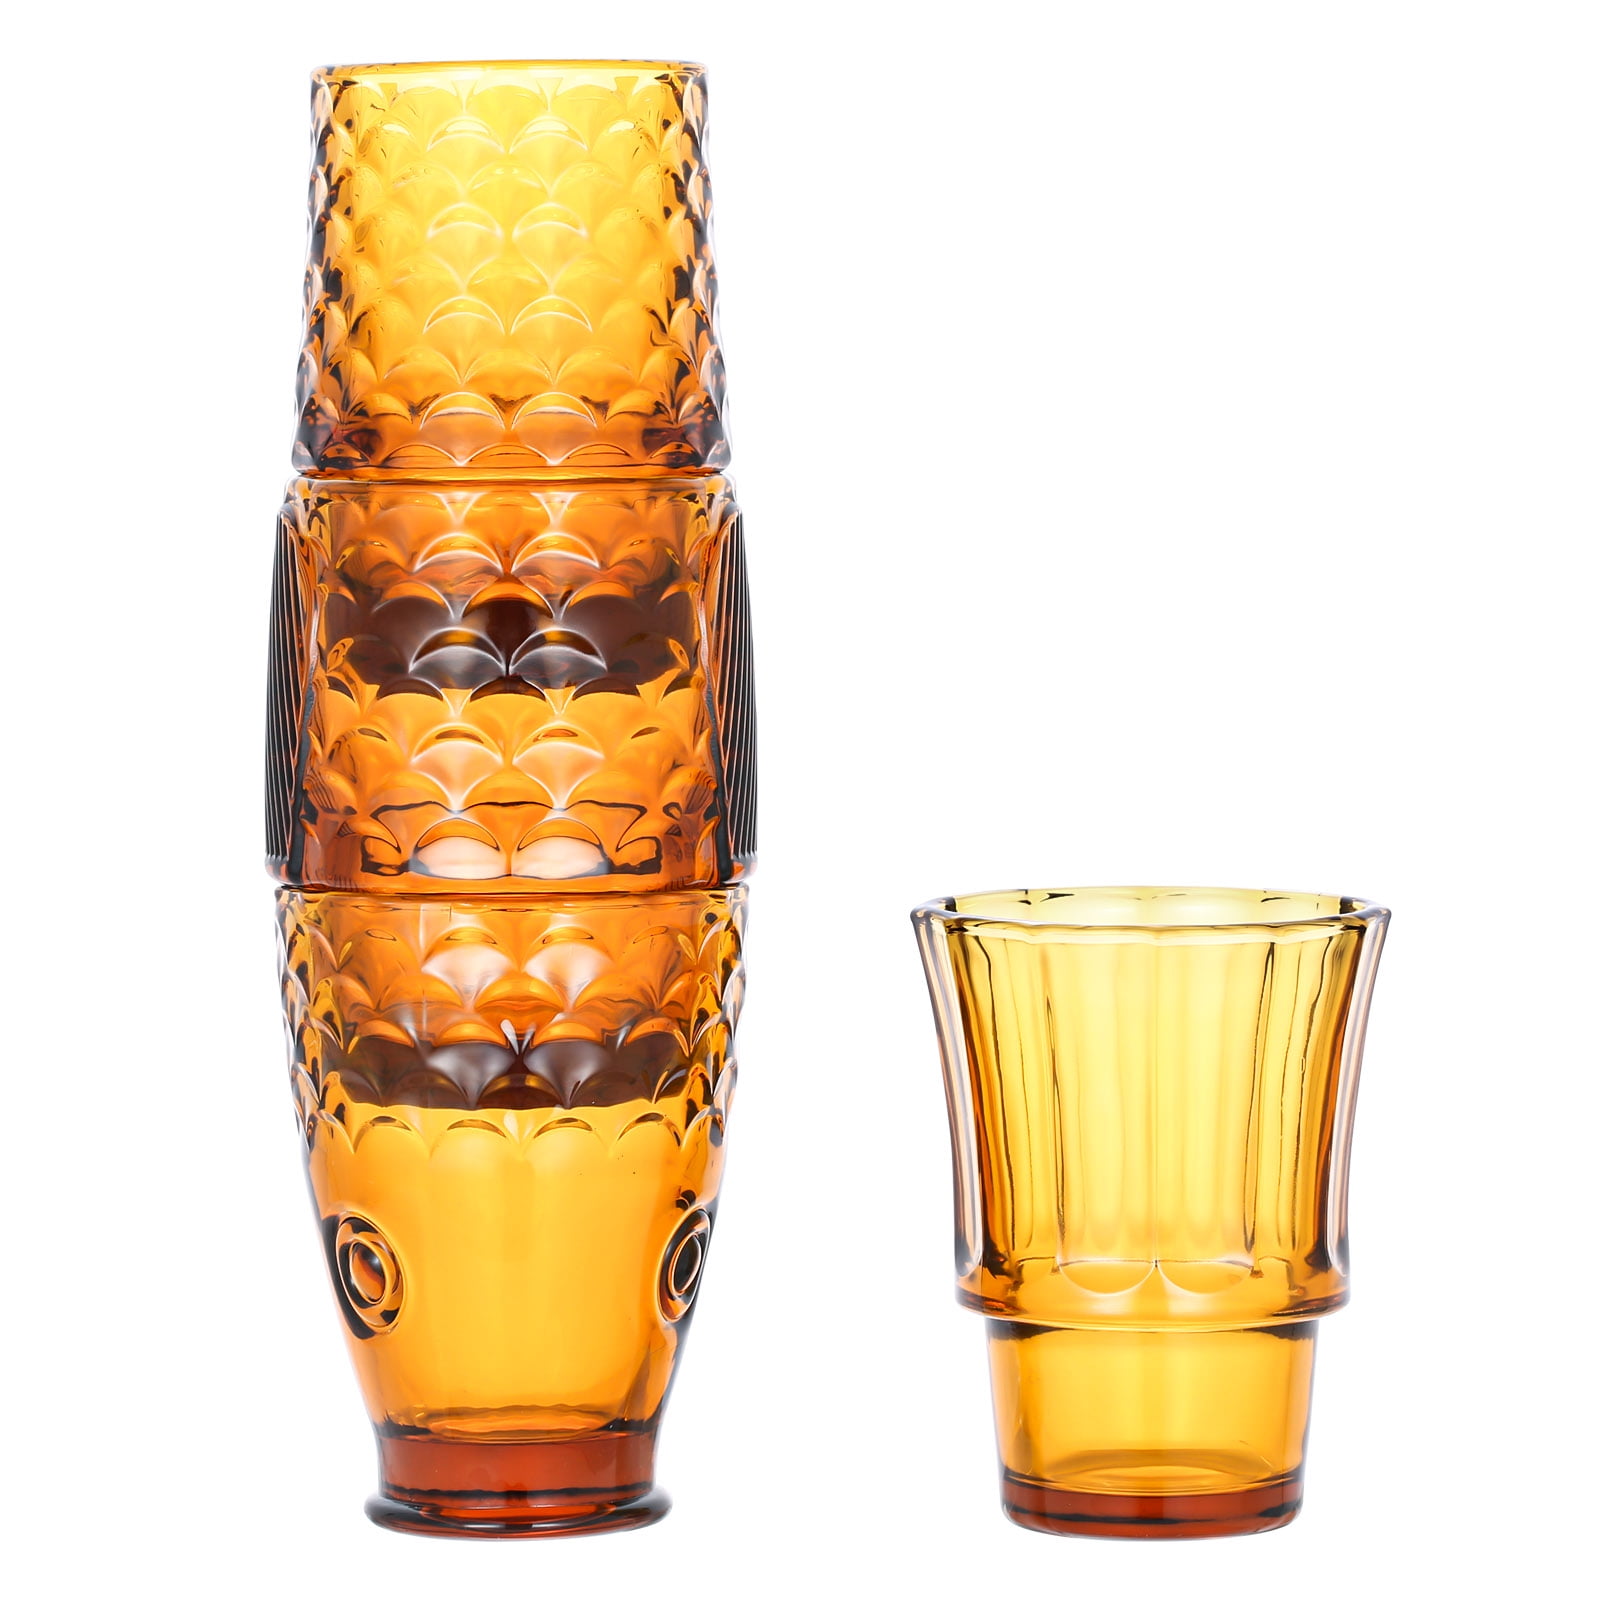 Stackable Drinking Glasses Amber Nautical Glassware for Gift Set of 4 MDLUU Fish Design Tumbler Glasses Colored Glass Beverage Cups